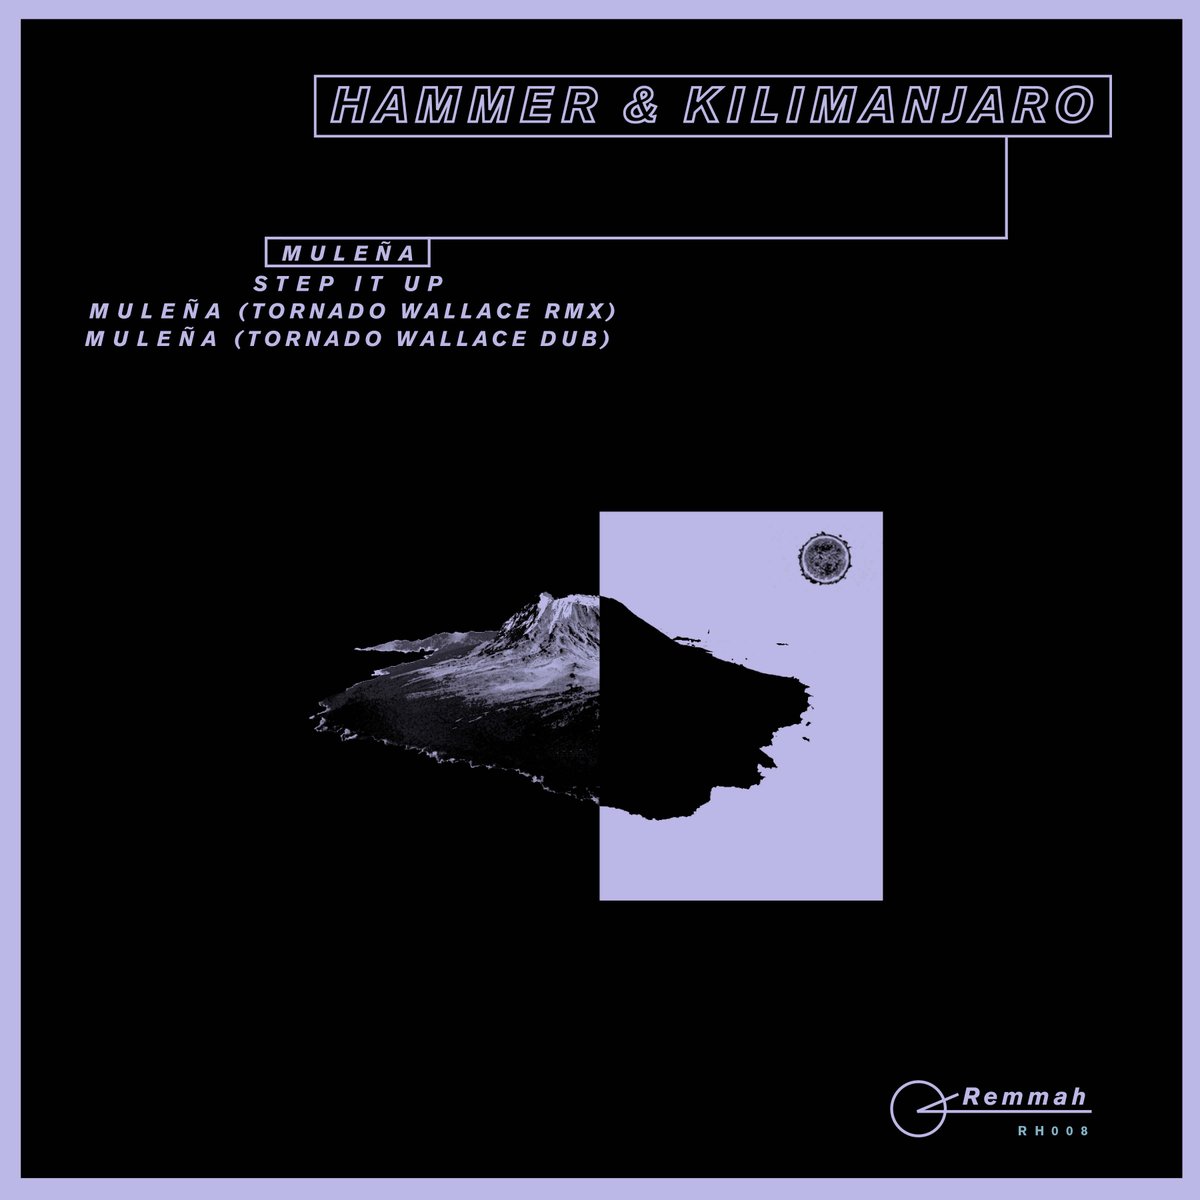 JULY 29th sees the release of this KILLER new collab from Remmah boss @thehammerhits & @joshkili aka KILIMANJARO. Two sweet originals, backed by two seriously impressive remixes from @tornadowallace Promo is LIVE for our DJs. Don't be sleeping now!